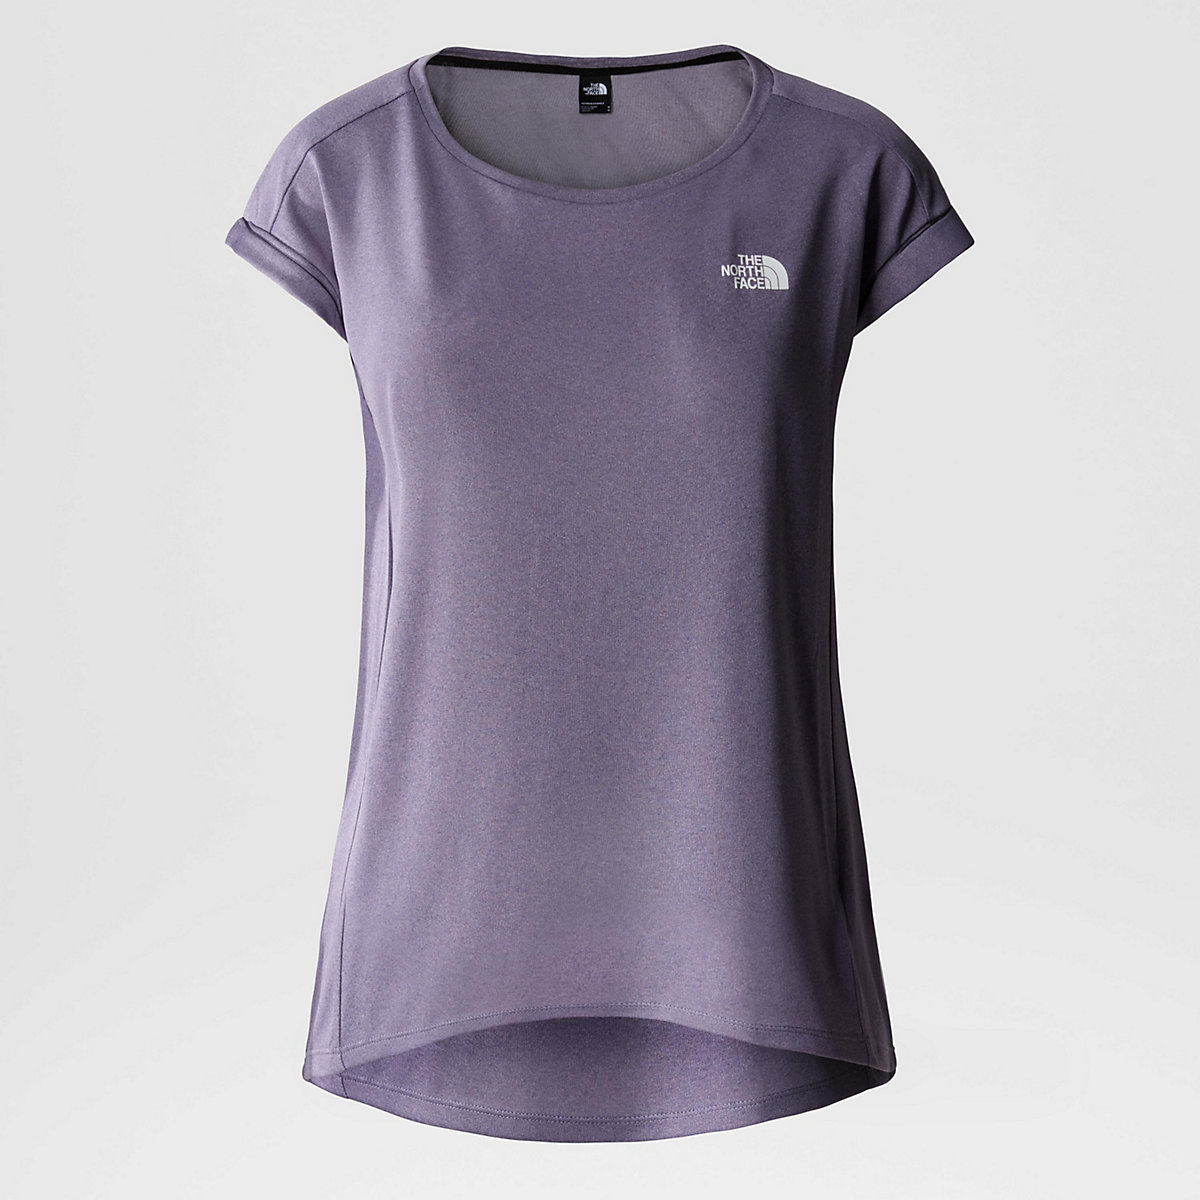 THE NORTH FACE Funktionsshirt Tanken lila